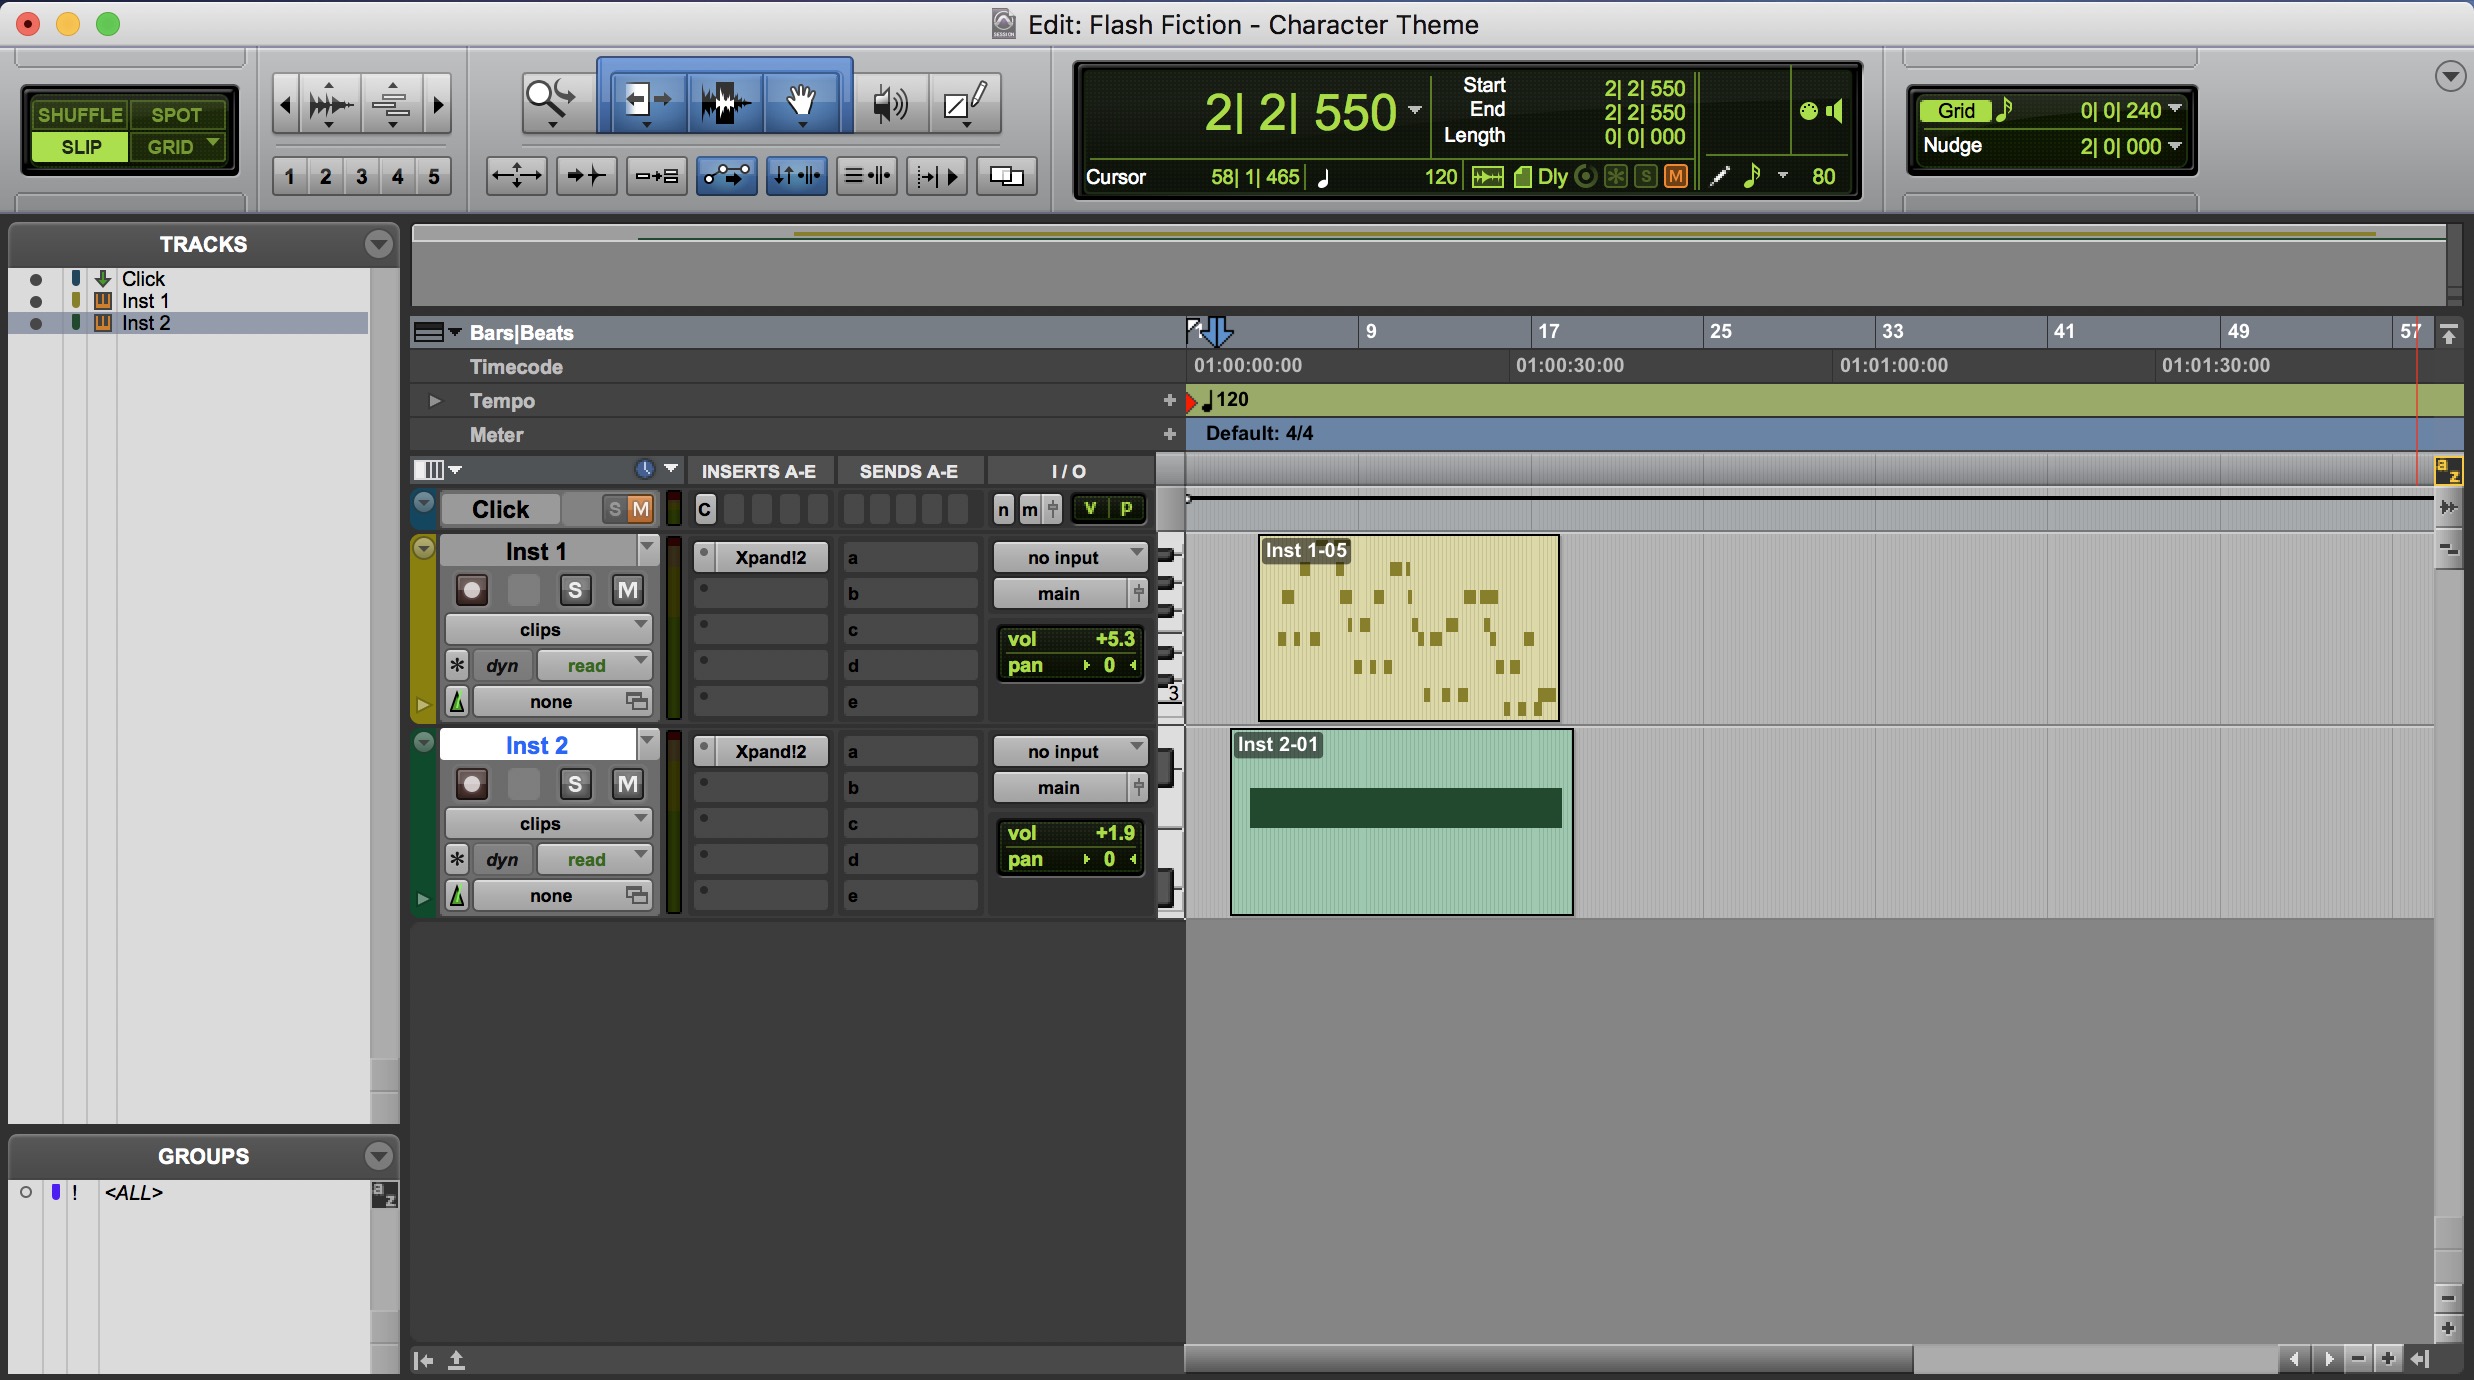 This is a screenshot of how I produced my Character Theme in Pro Tools